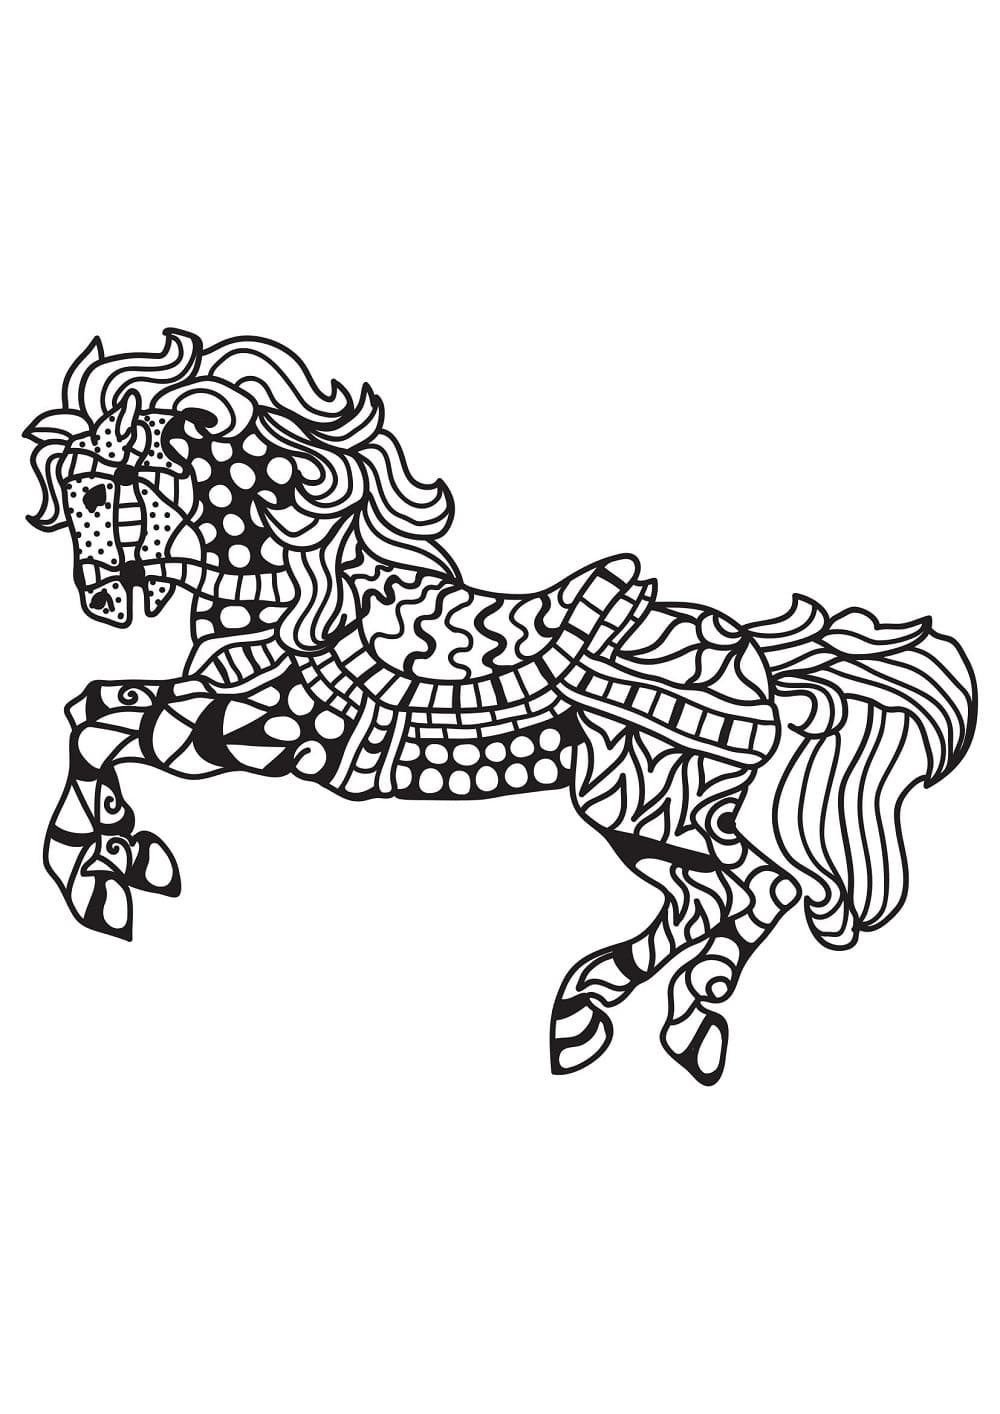 Coloriage Adulte Cheval Imprimable